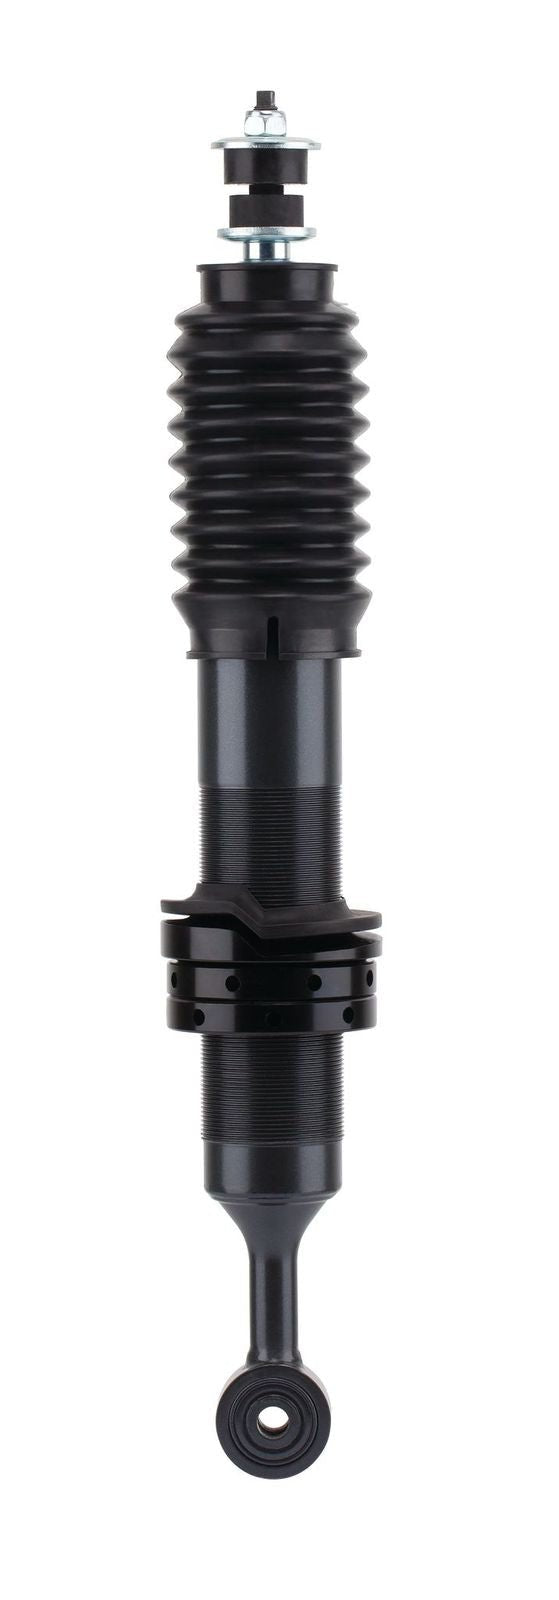 Shock Absorber - Foam Cell Pro Strut - Performance to suit Toyota Hilux Vigo 10/2011 - 2015 - Mick Tighe 4x4 & Outdoor-Ironman 4x4-45710FE--Shock Absorber - Foam Cell Pro Strut - Performance to suit Toyota Hilux Vigo 10/2011 - 2015